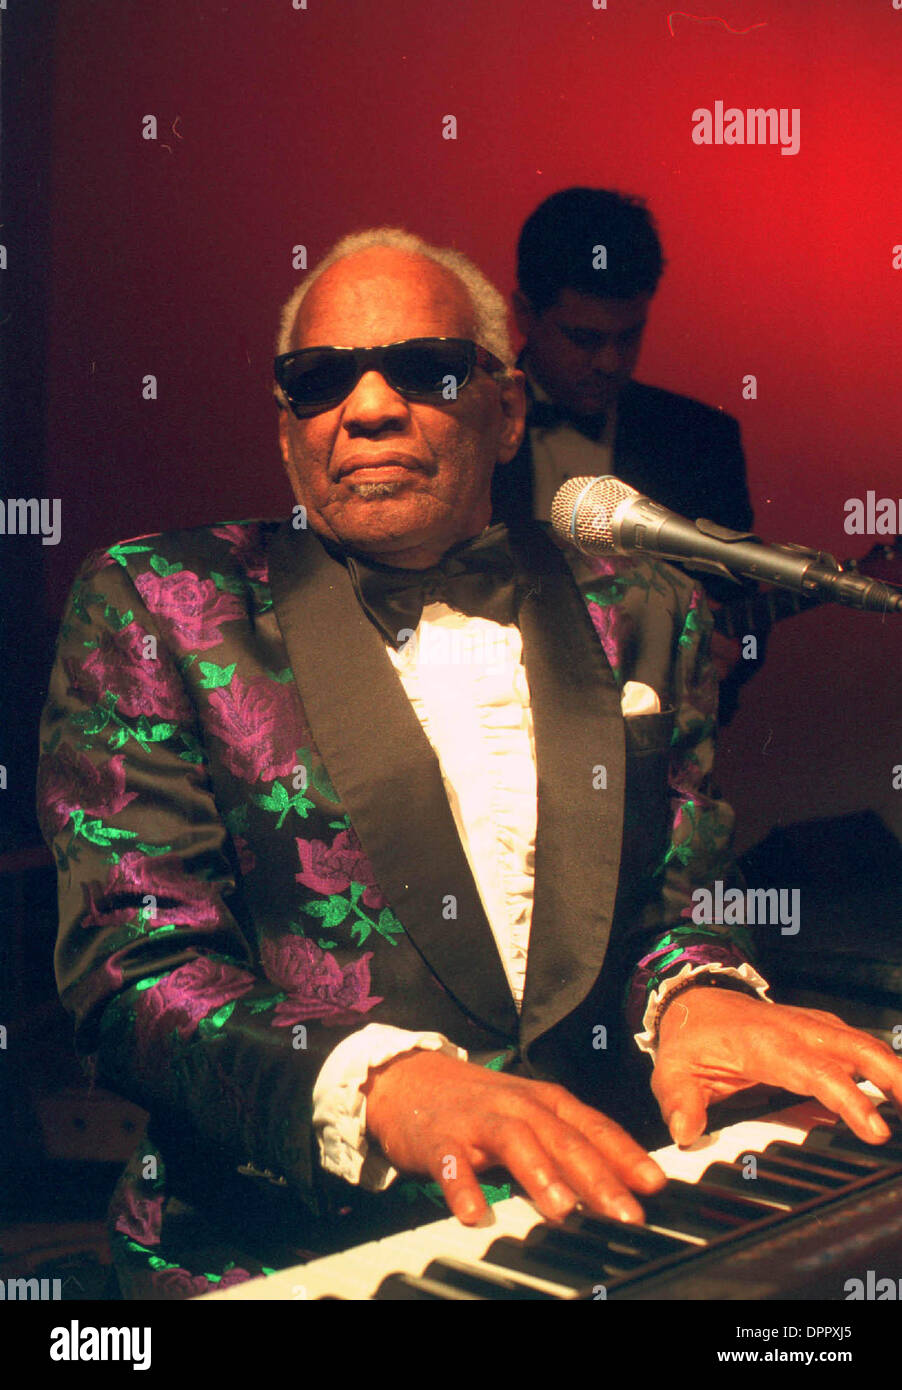 Aug. 15, 2006 - Ray Charles @ Twirl for 